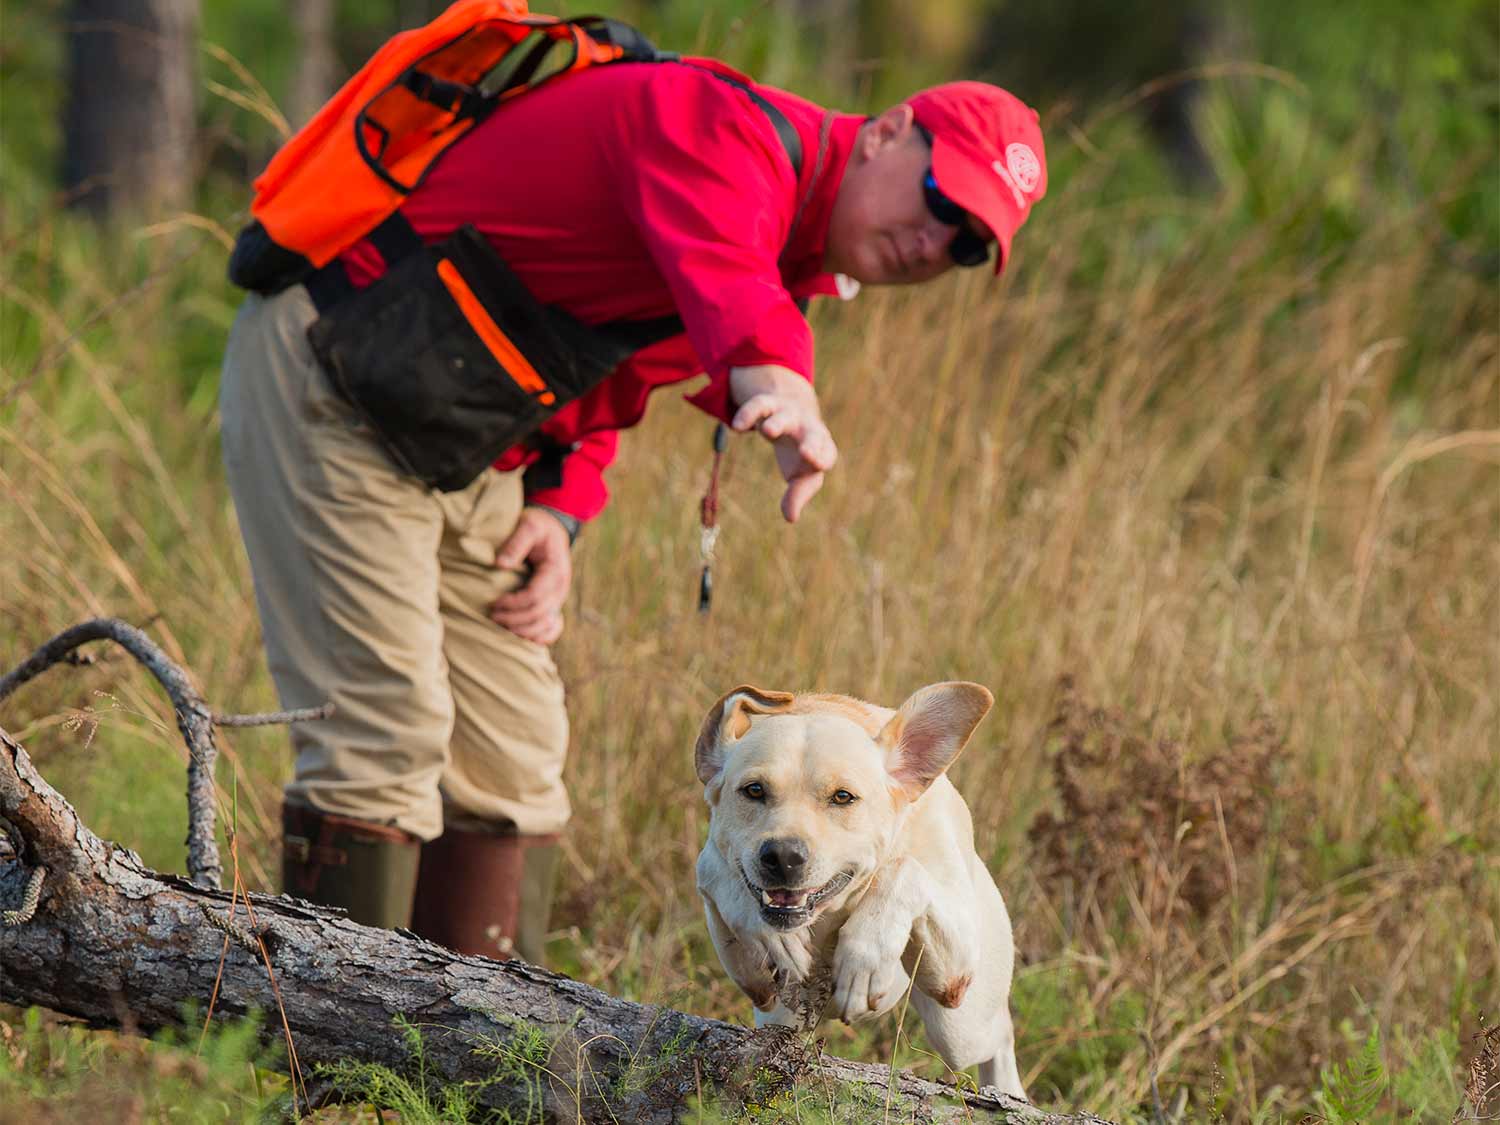 A man in red trains a hunting dog.